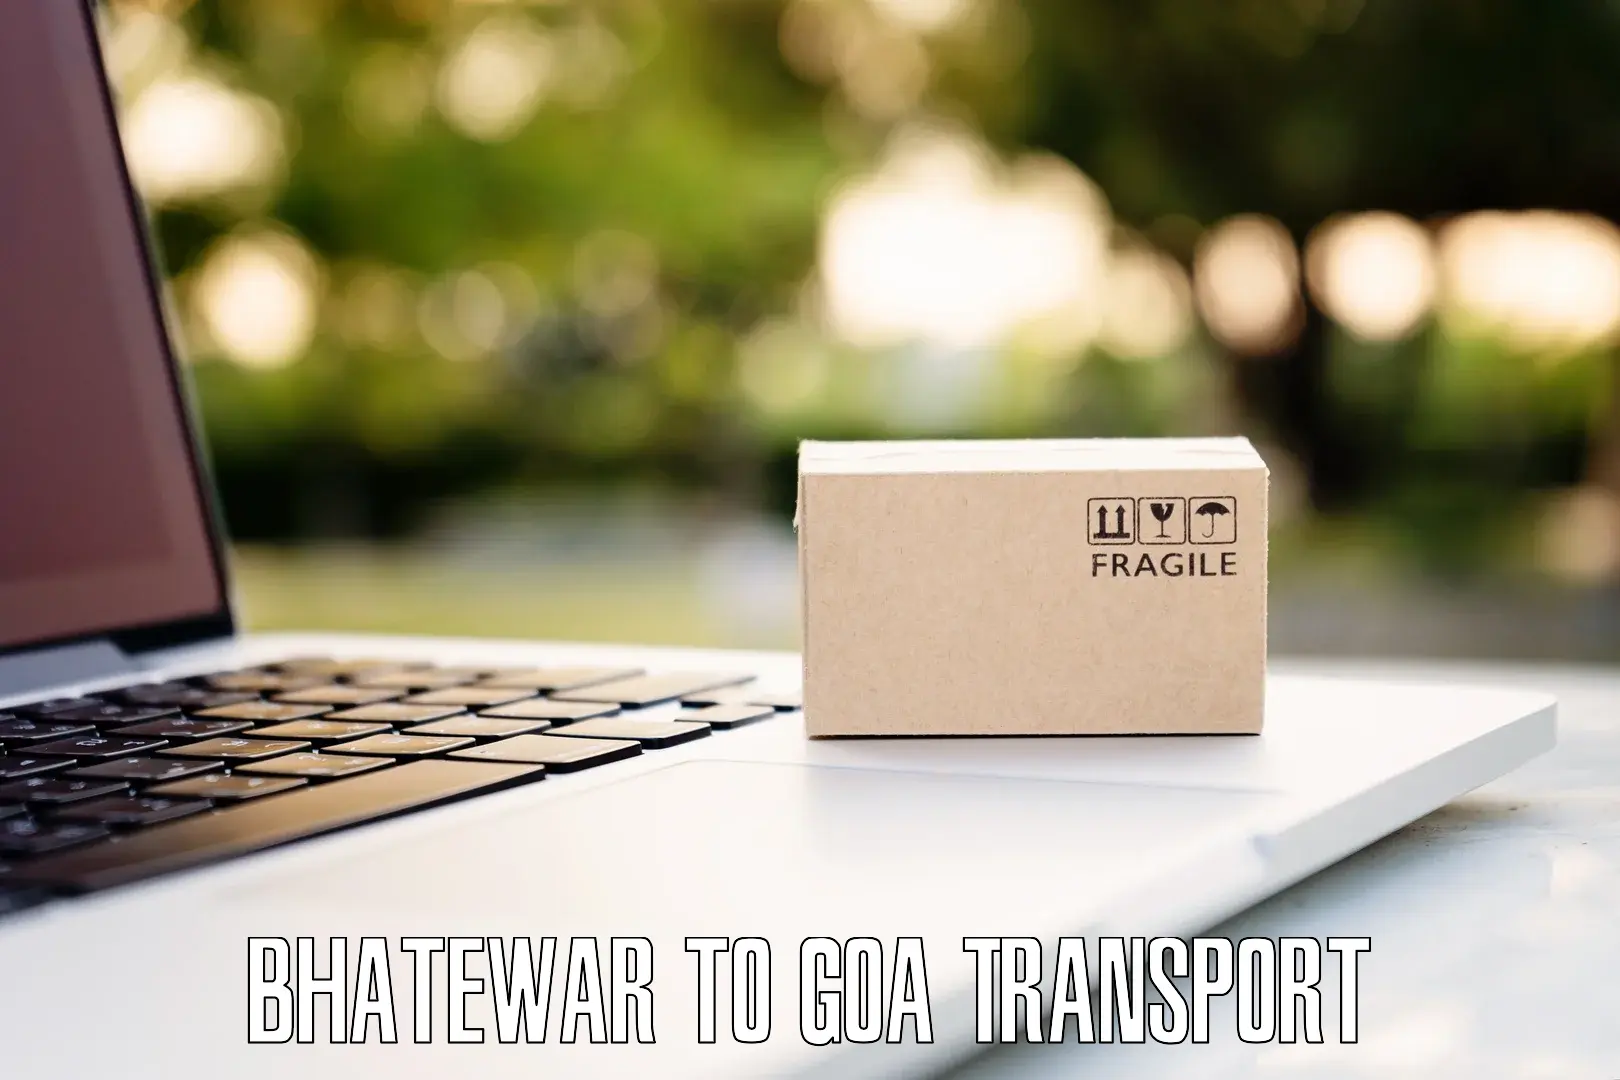 Parcel transport services Bhatewar to Canacona